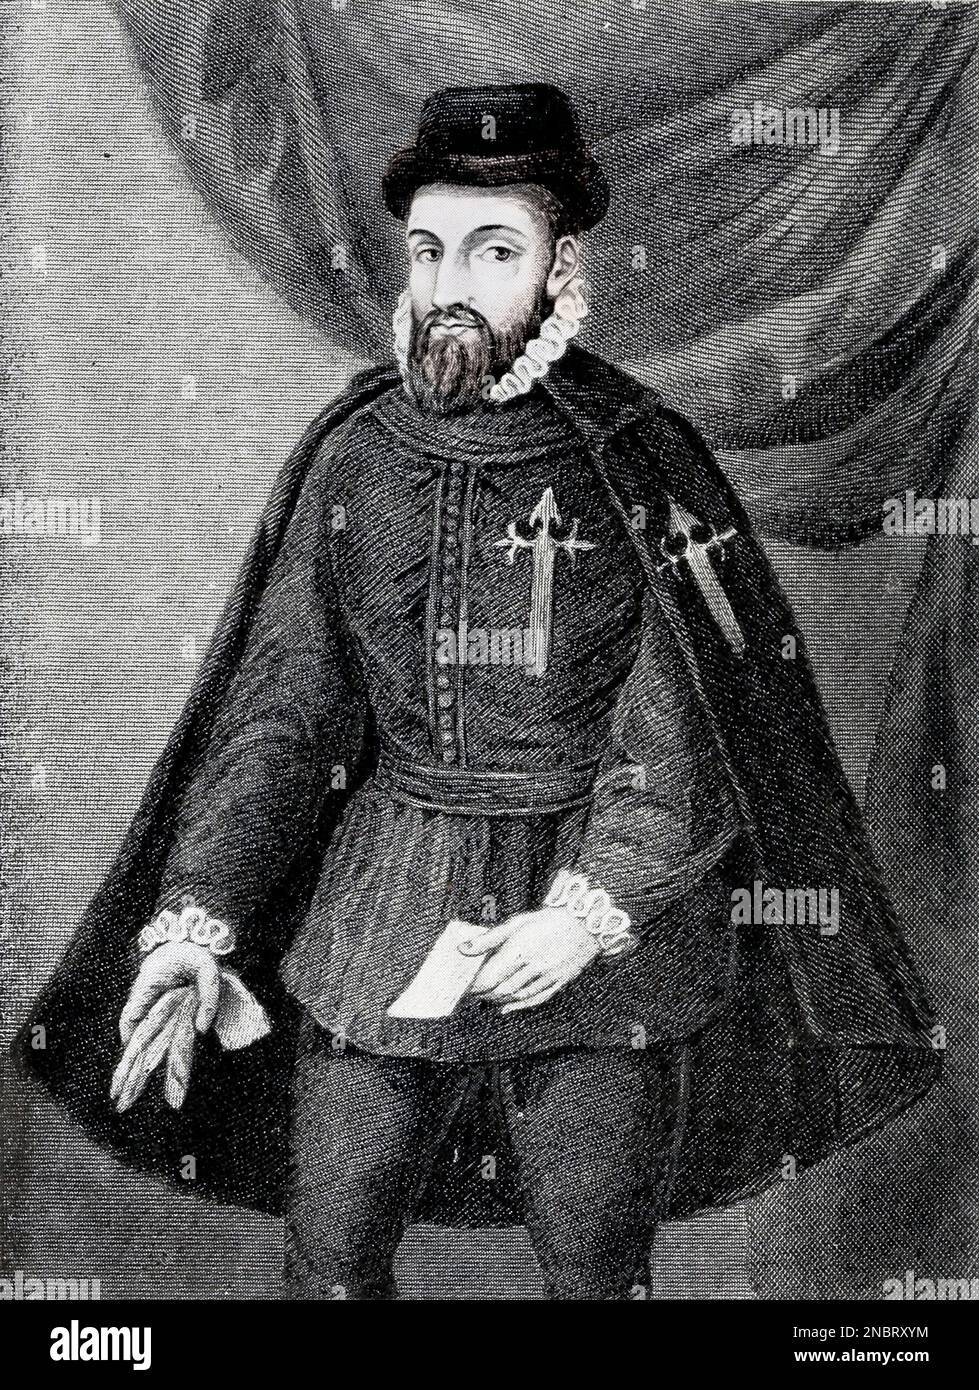 Portrait of Francisco Pizarro, (from Prescott's “Peru') from the book ' A history of Peru by Sir Clements Robert Markham, Publisher Chicago : C. H. Sergel and Company Publication date 1892 Stock Photo